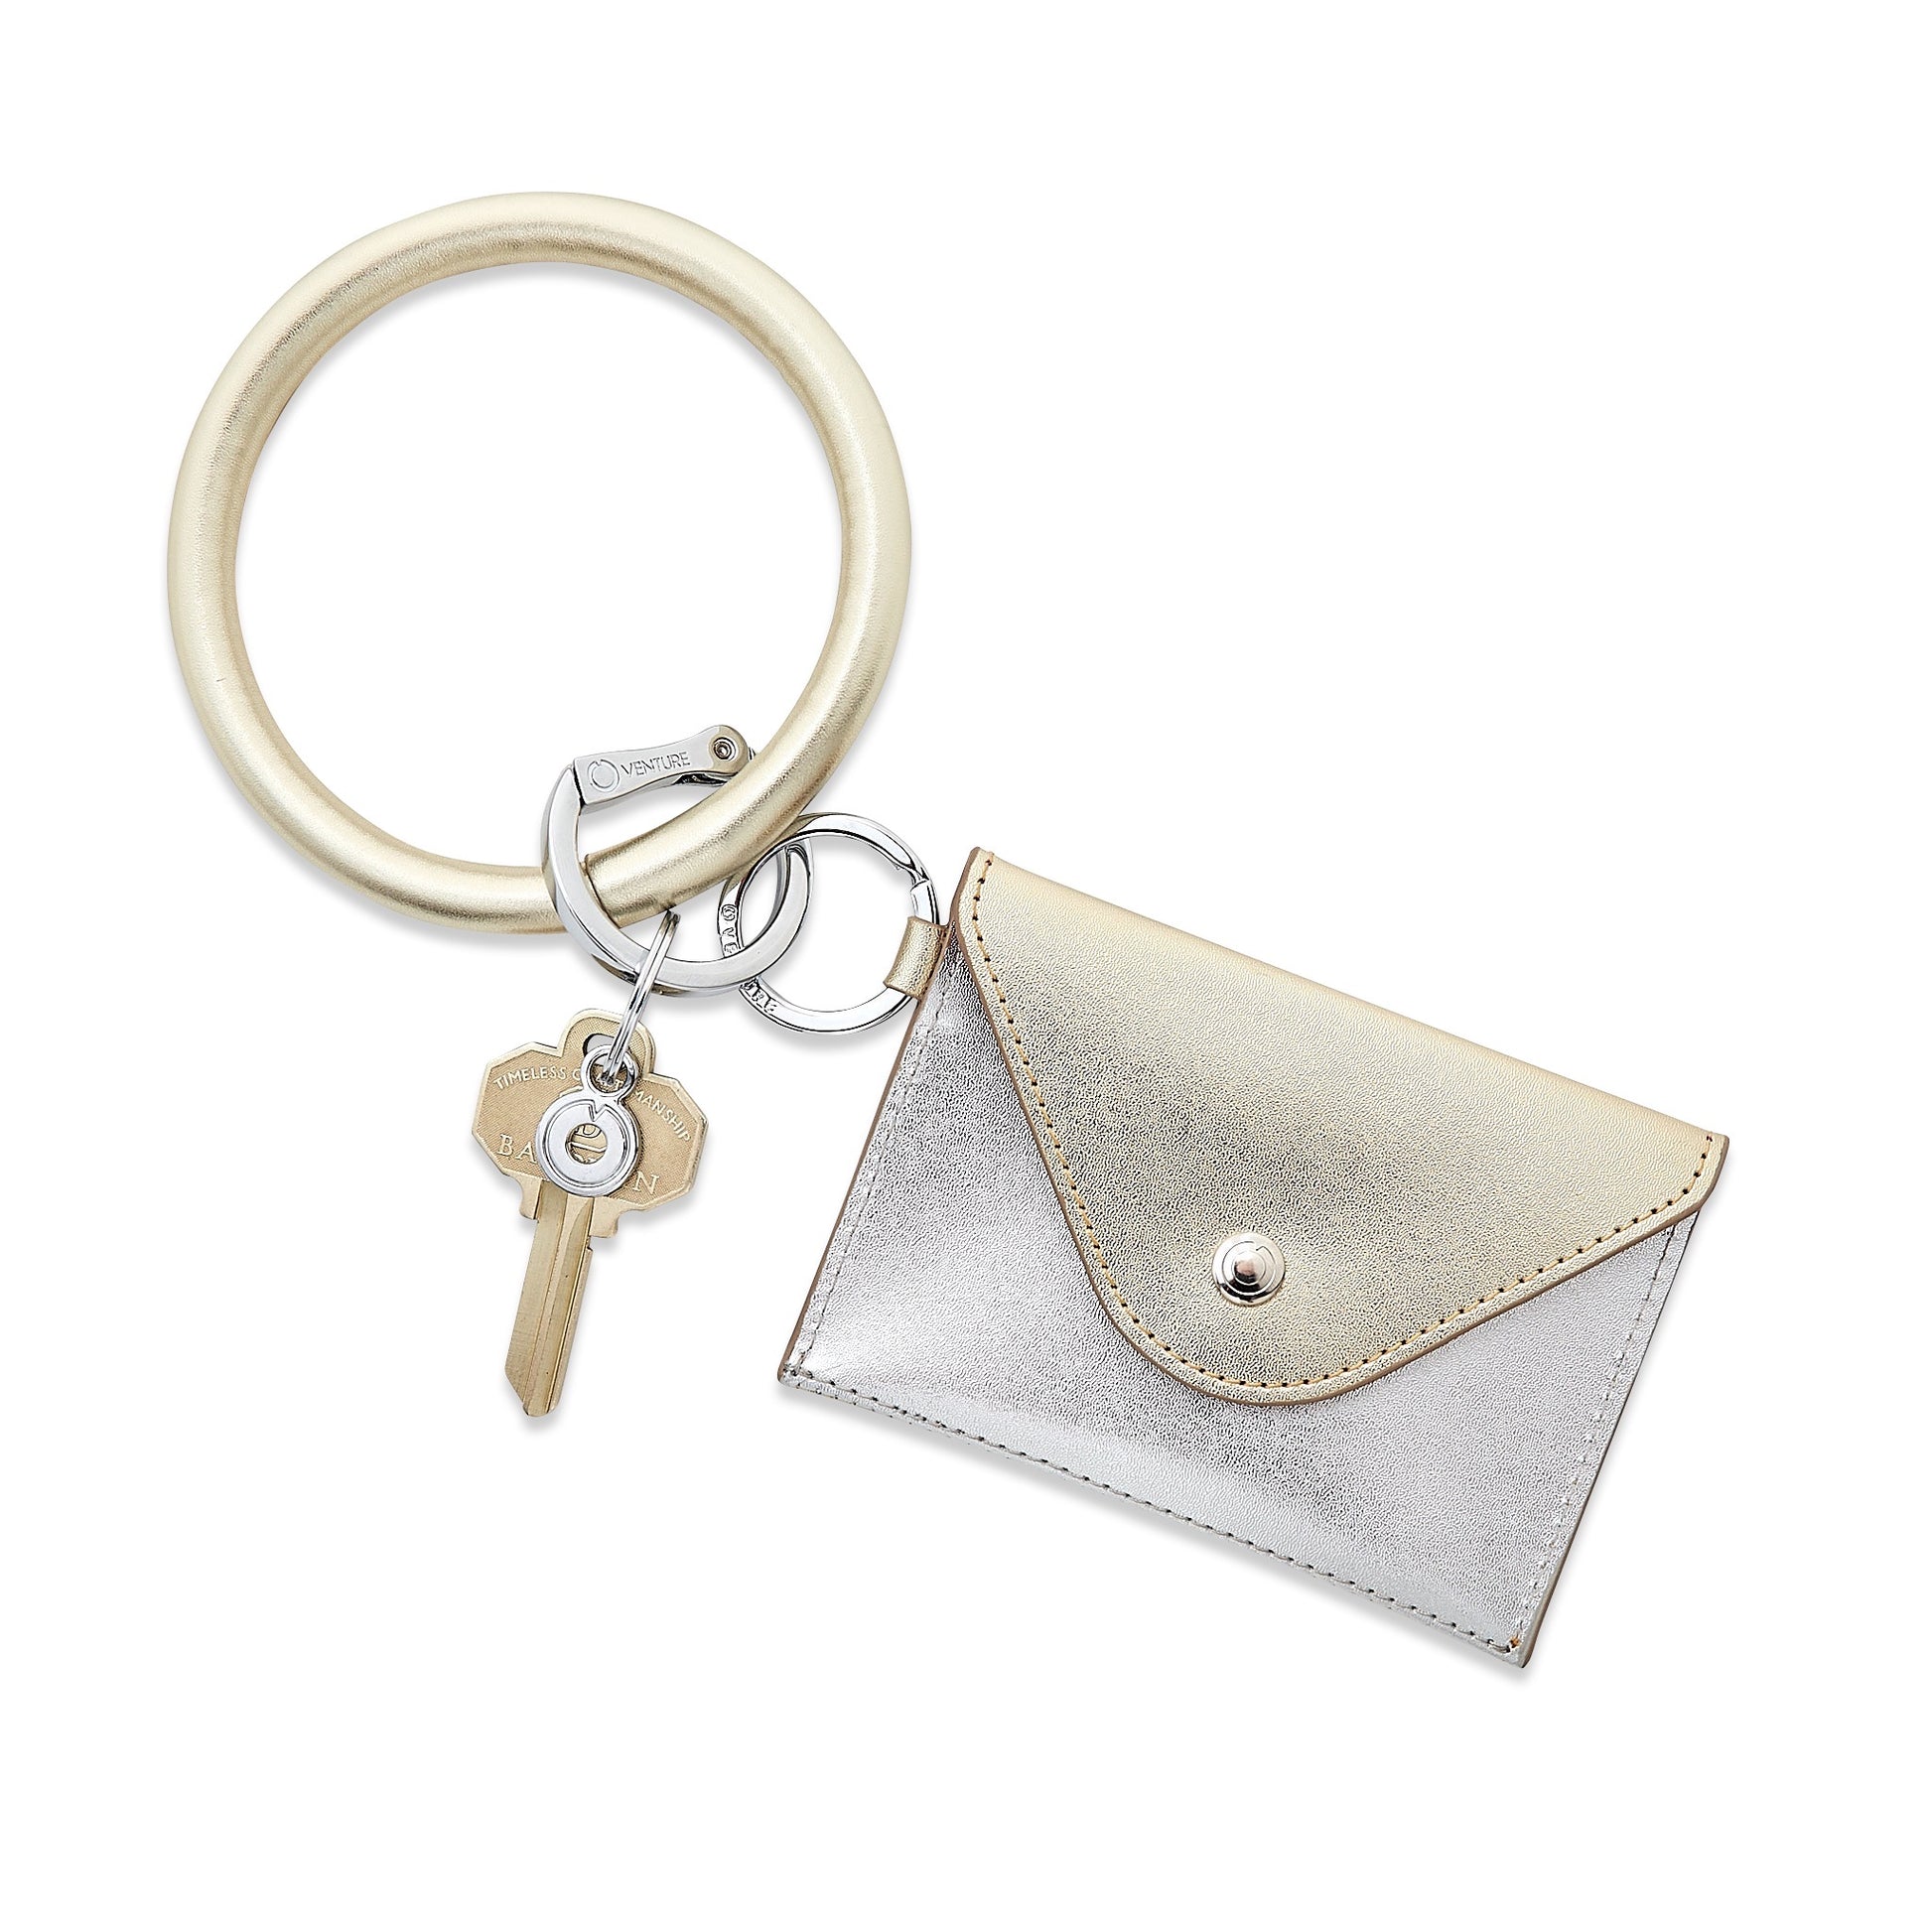 Leather mini envelope with gold flap and back with silver front with silver hardware. Shown on Gold Big O Key Ring